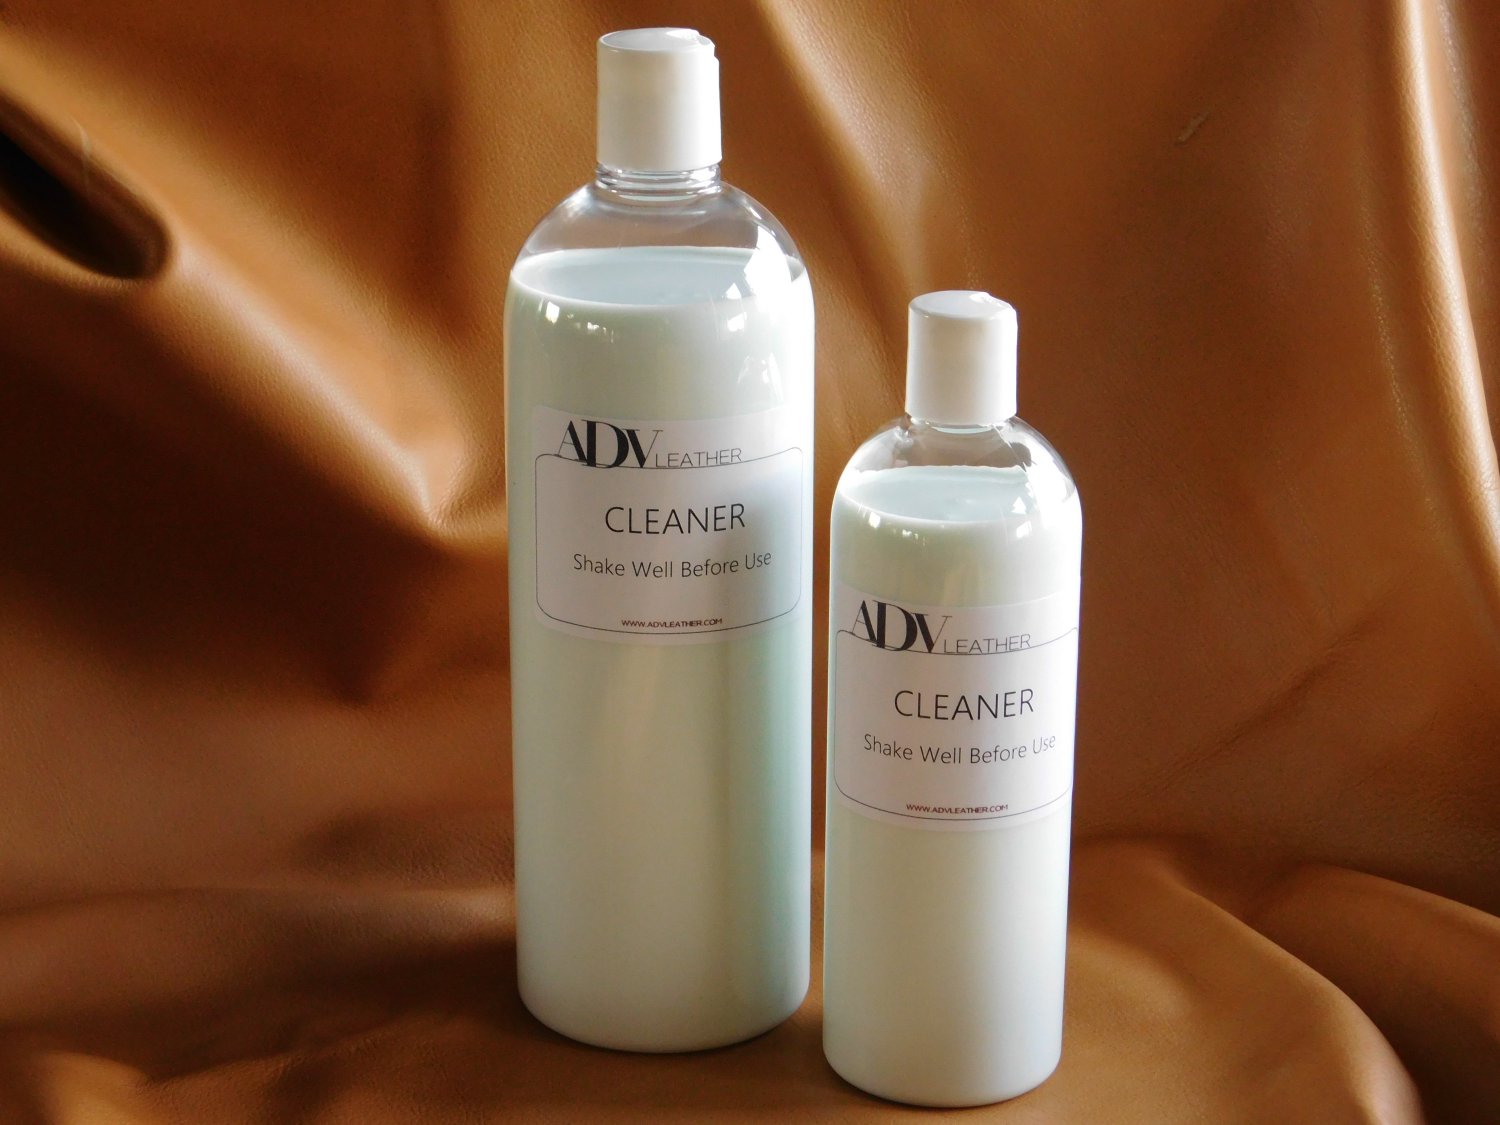 ADV leather cleaner